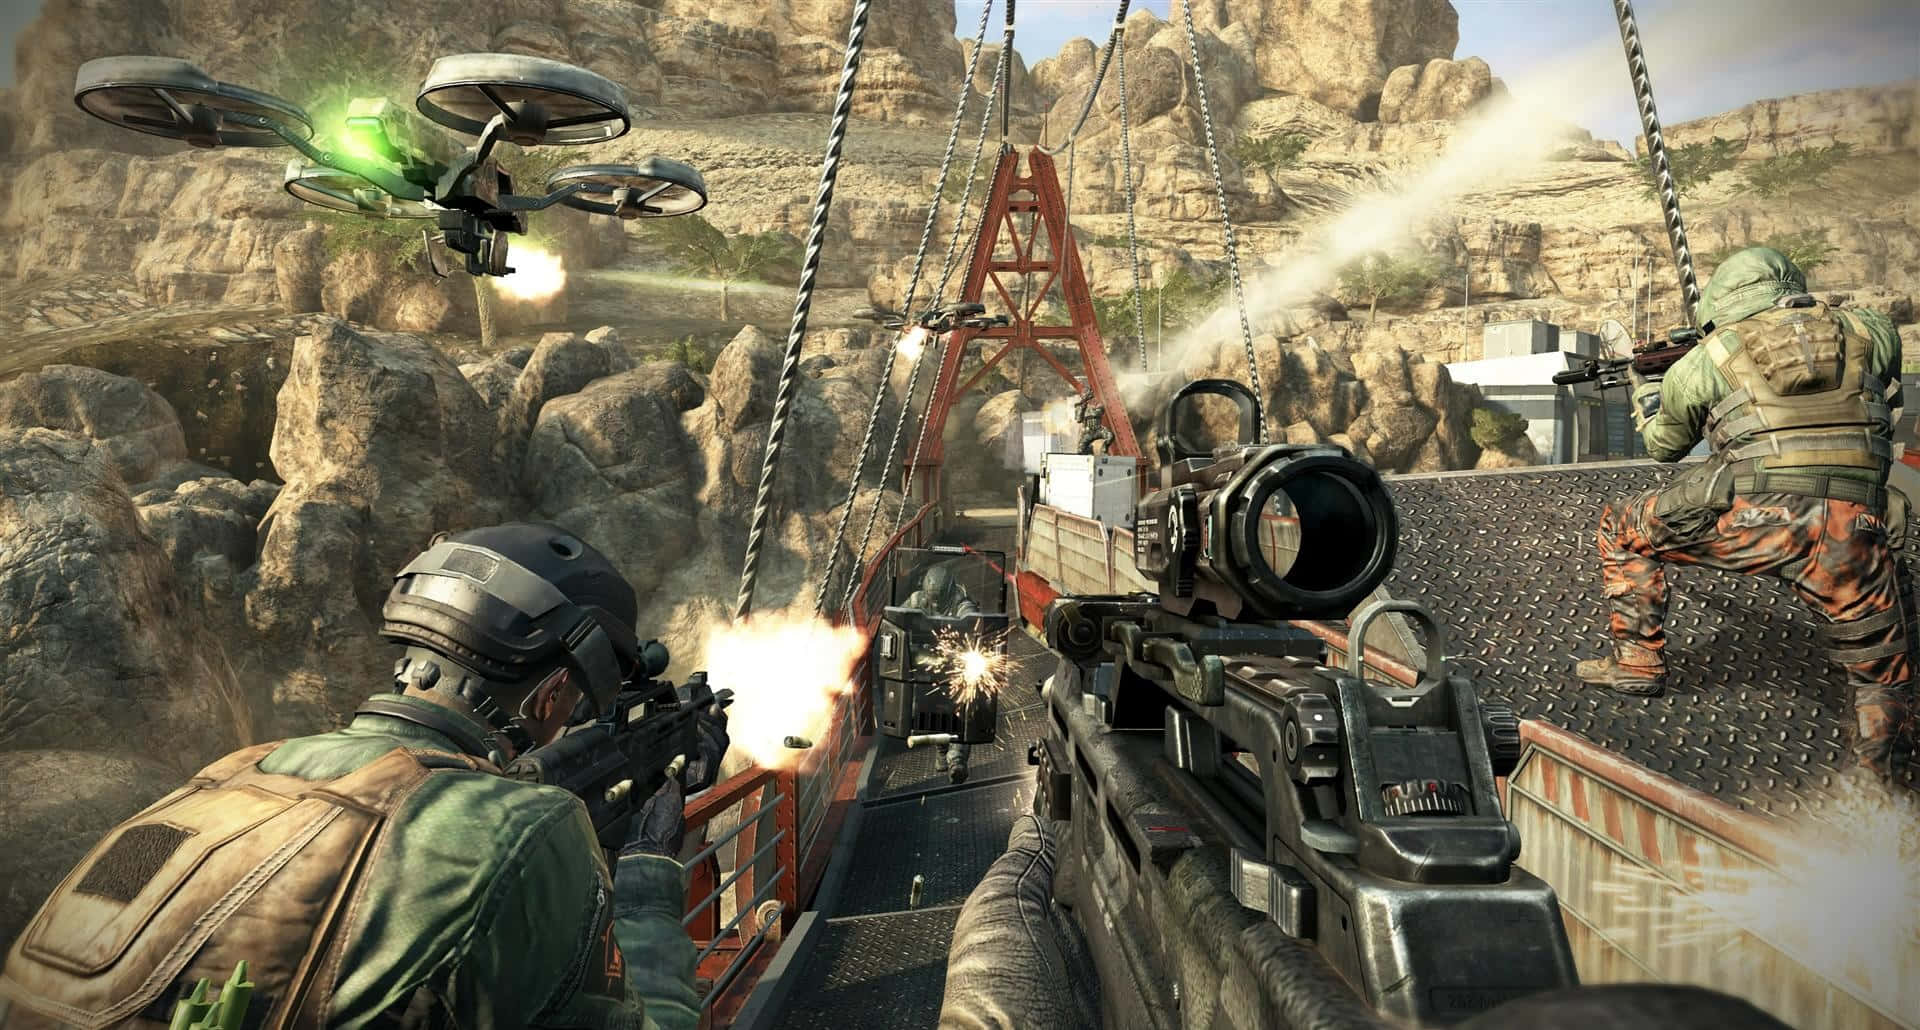 Play Call Of Duty Black Ops Cold War on Ultra HD Resolution